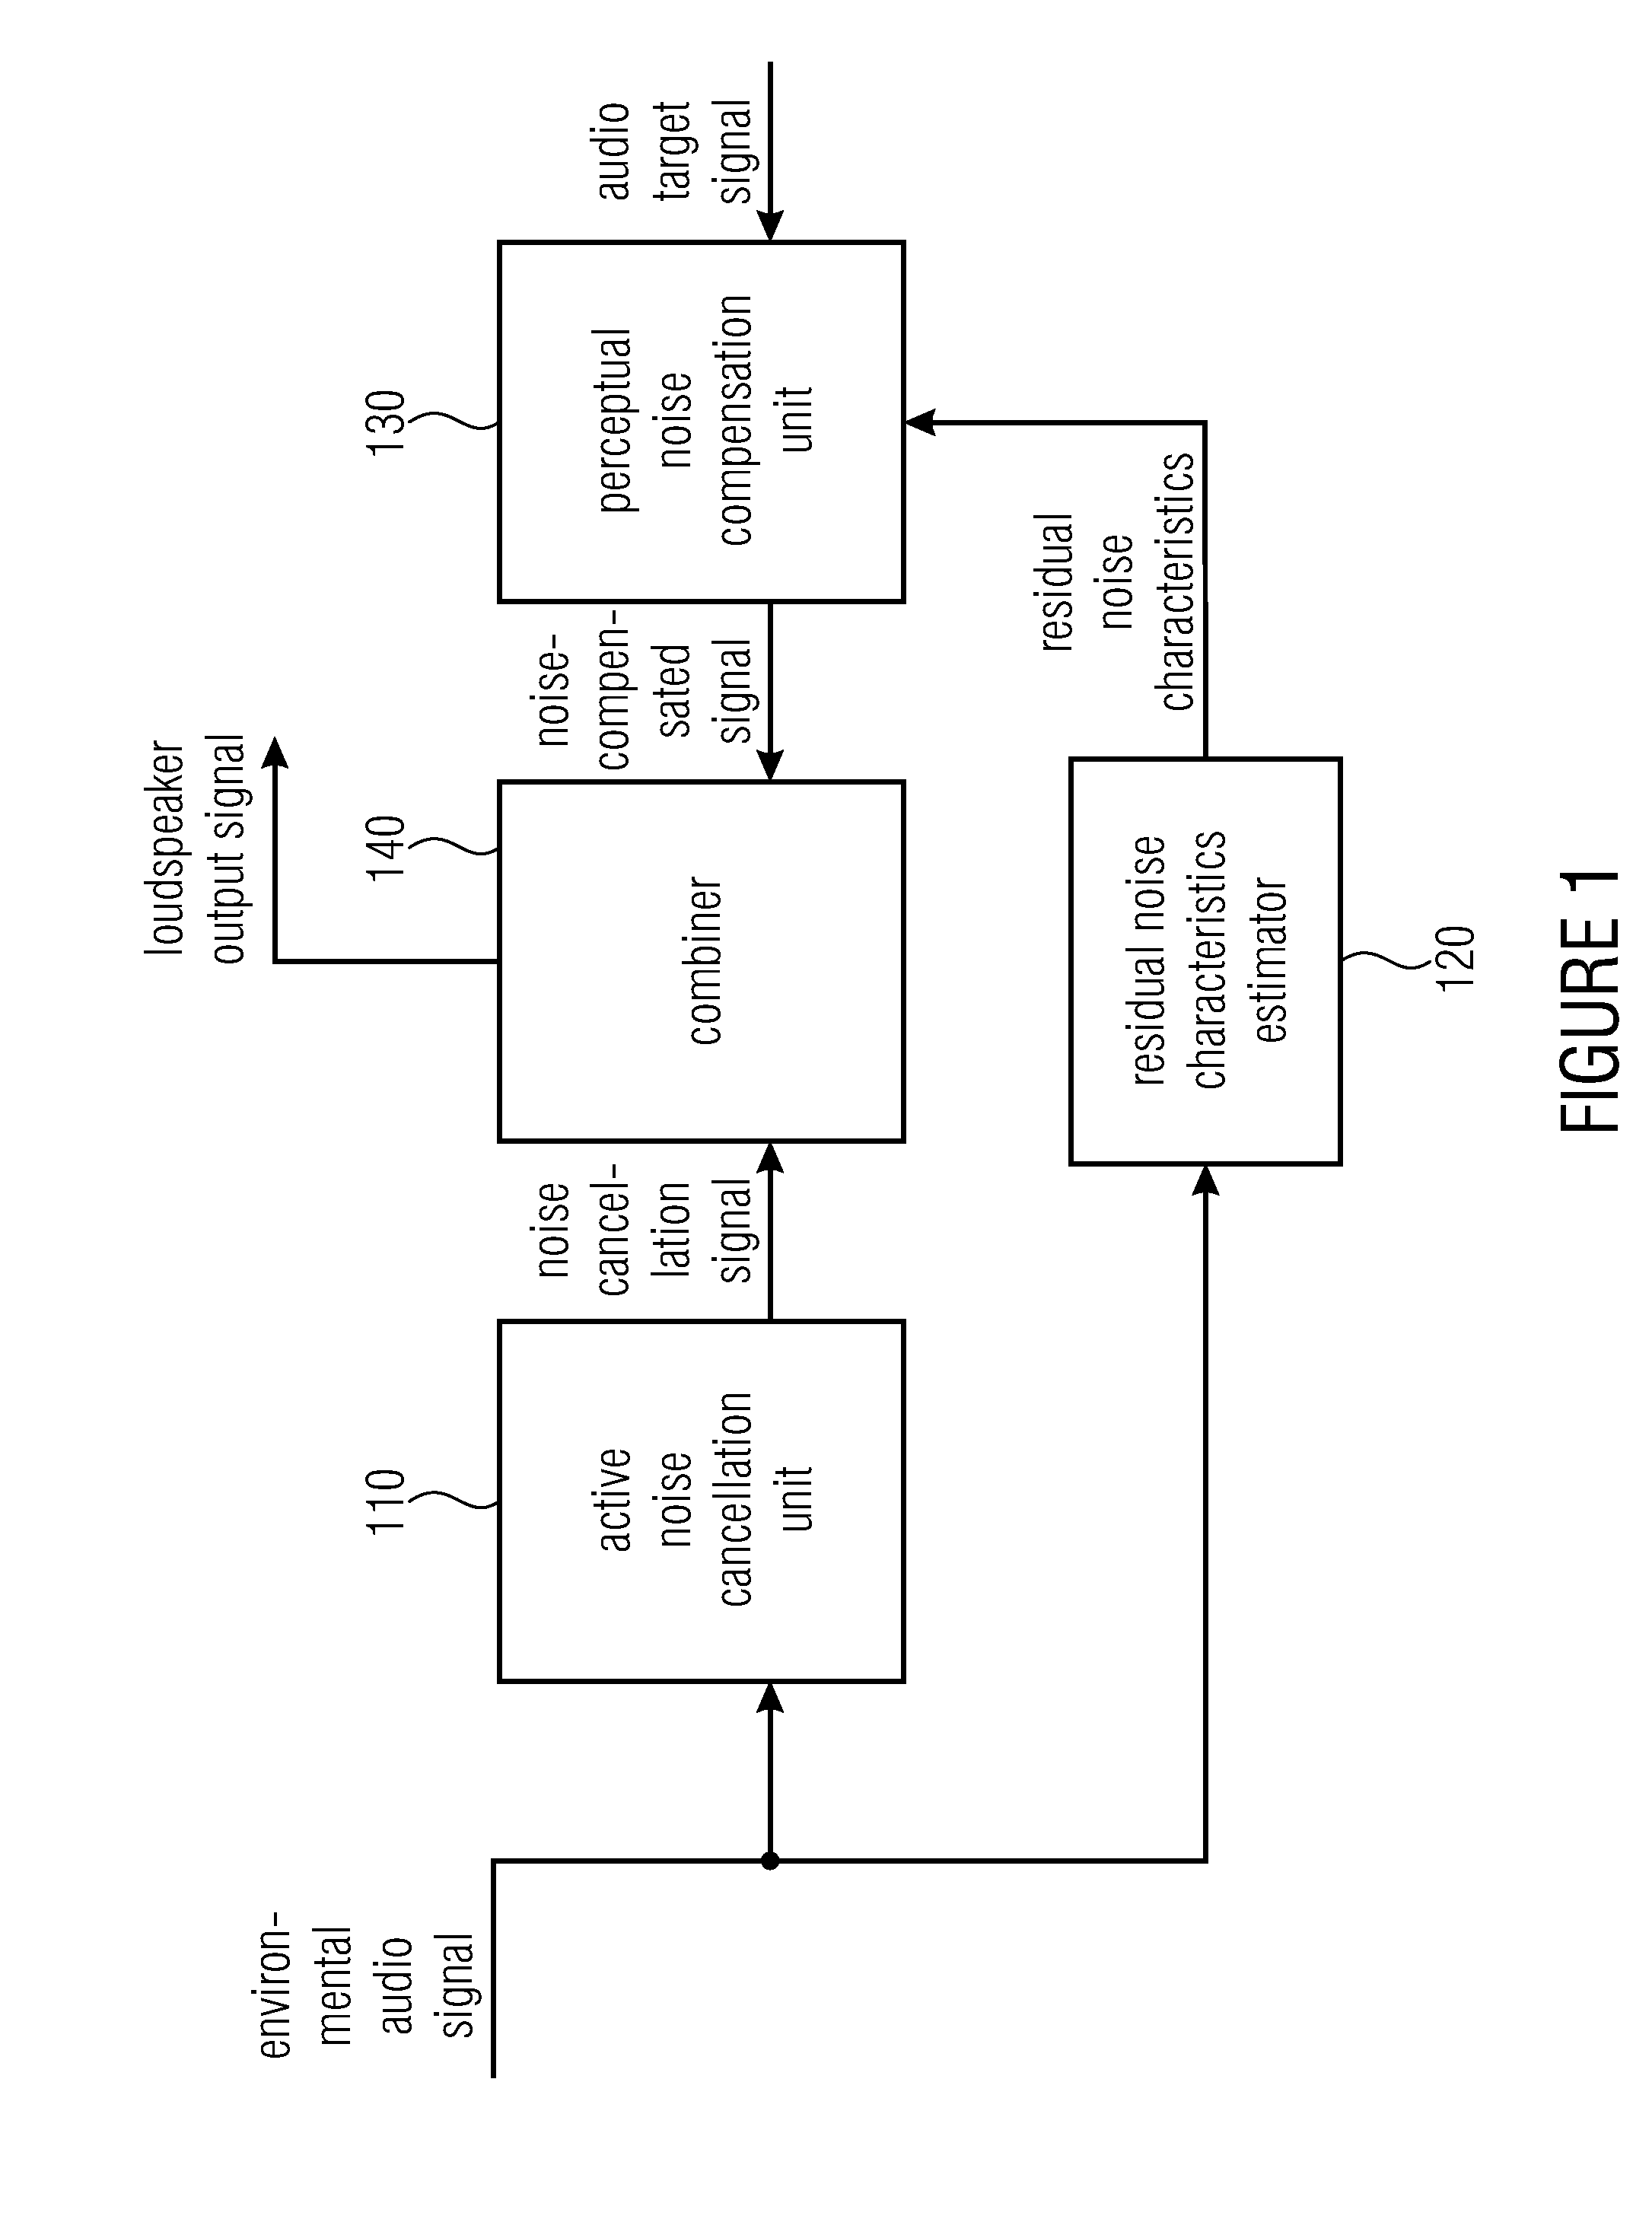 Apparatus and method for improving the perceived quality of sound reproduction by combining active noise cancellation and a perceptual noise compensation